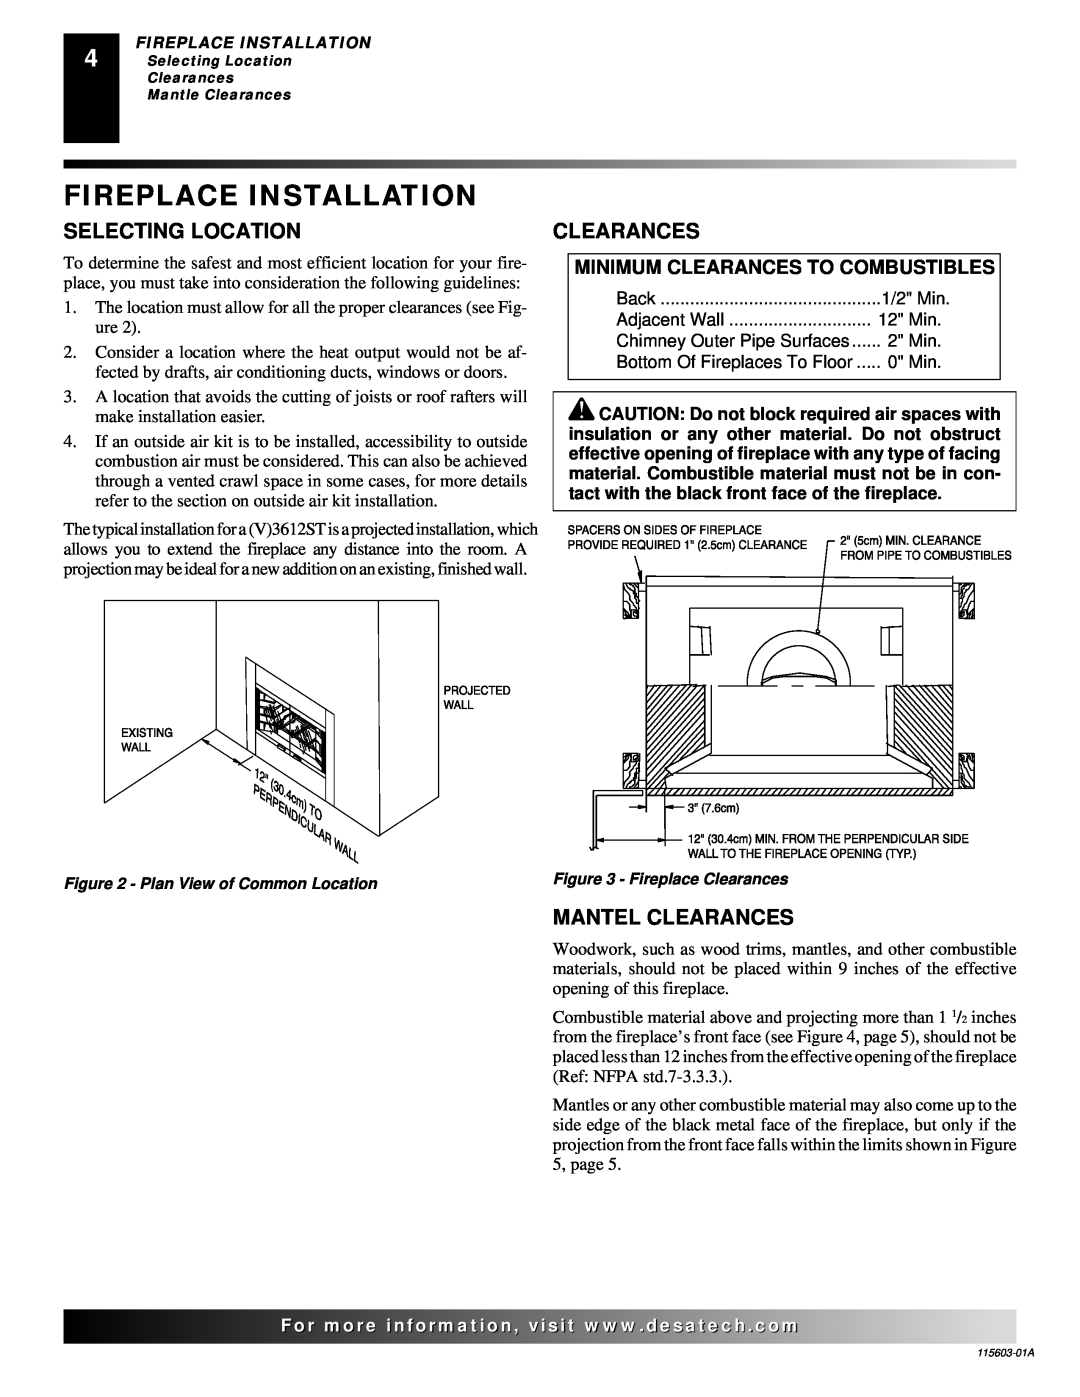 Desa (V)3612ST operating instructions Fireplace Installation, Selecting Location, Mantel Clearances 